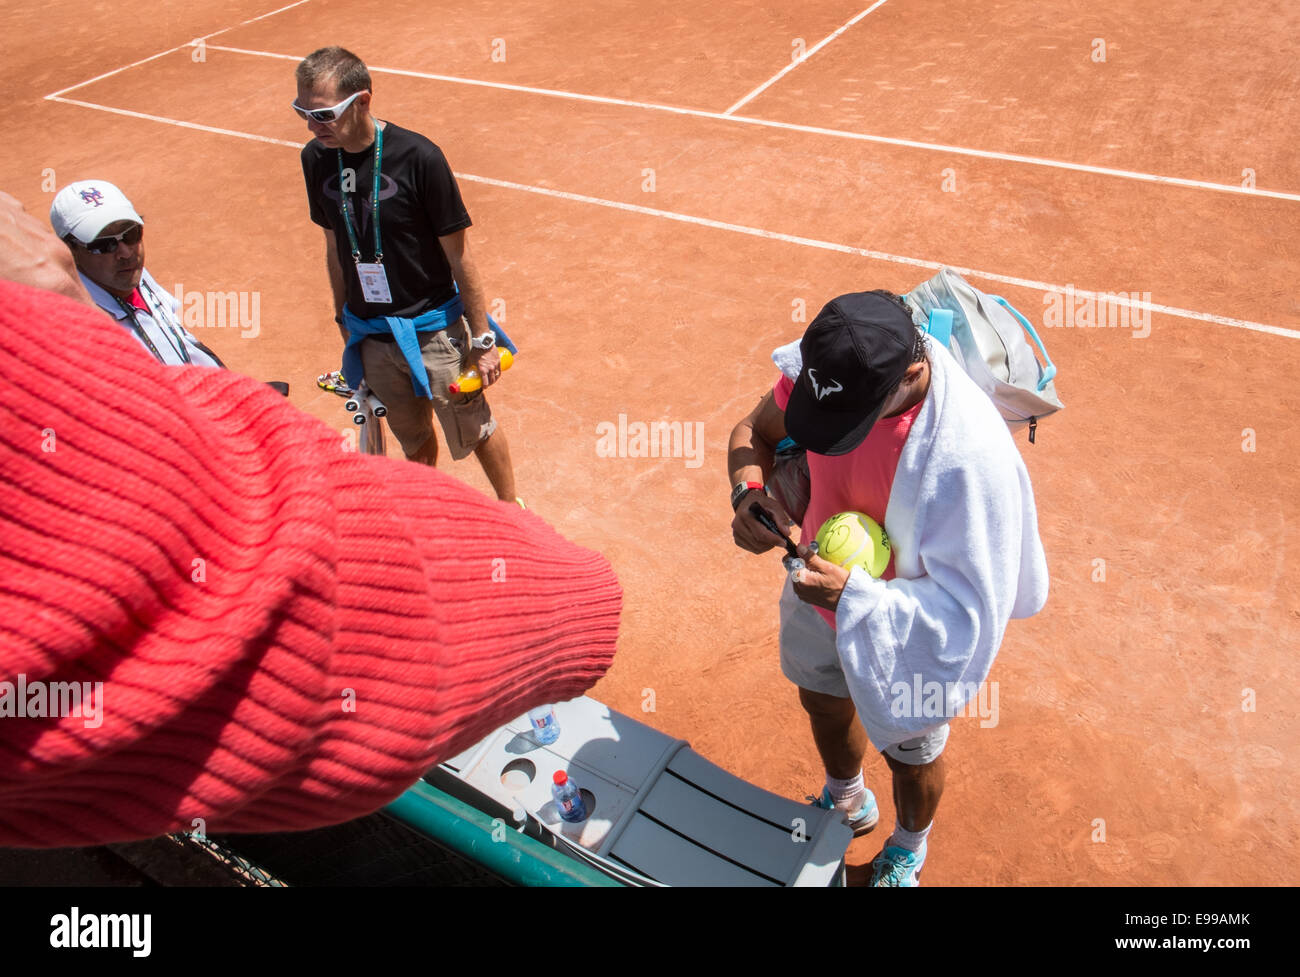 Spaniard Rafa Nadal signs signature,autograph for fans after end of his practice session practice court at Roland Garros,Paris. Stock Photo